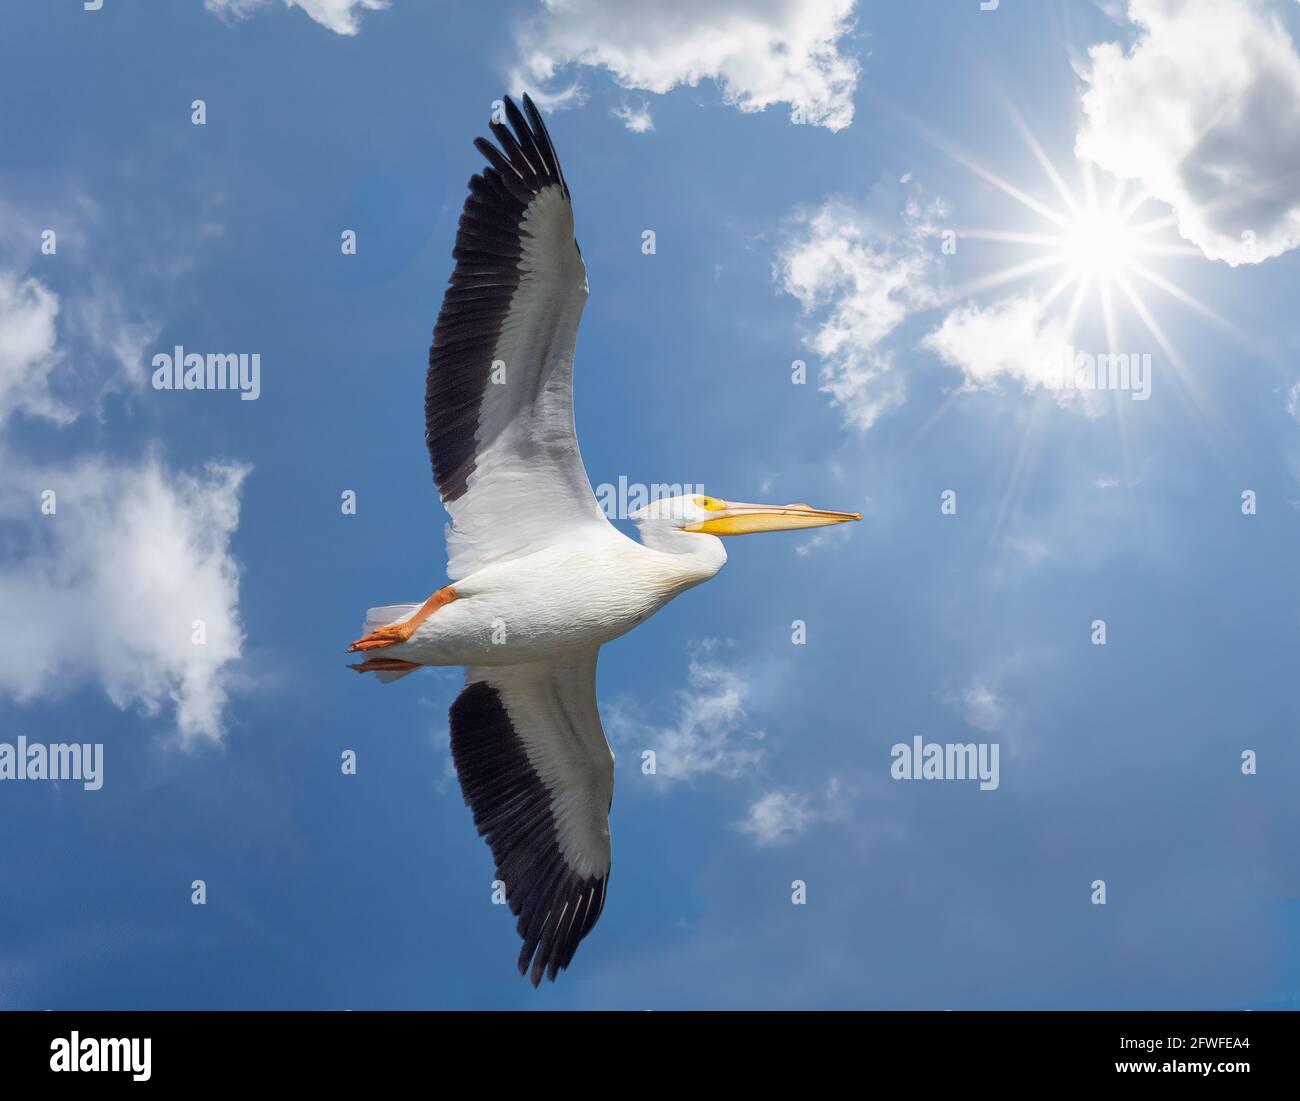 Single white pelican soaring in blue sky with white clouds and sunburst in sky above the bird Stock Photo